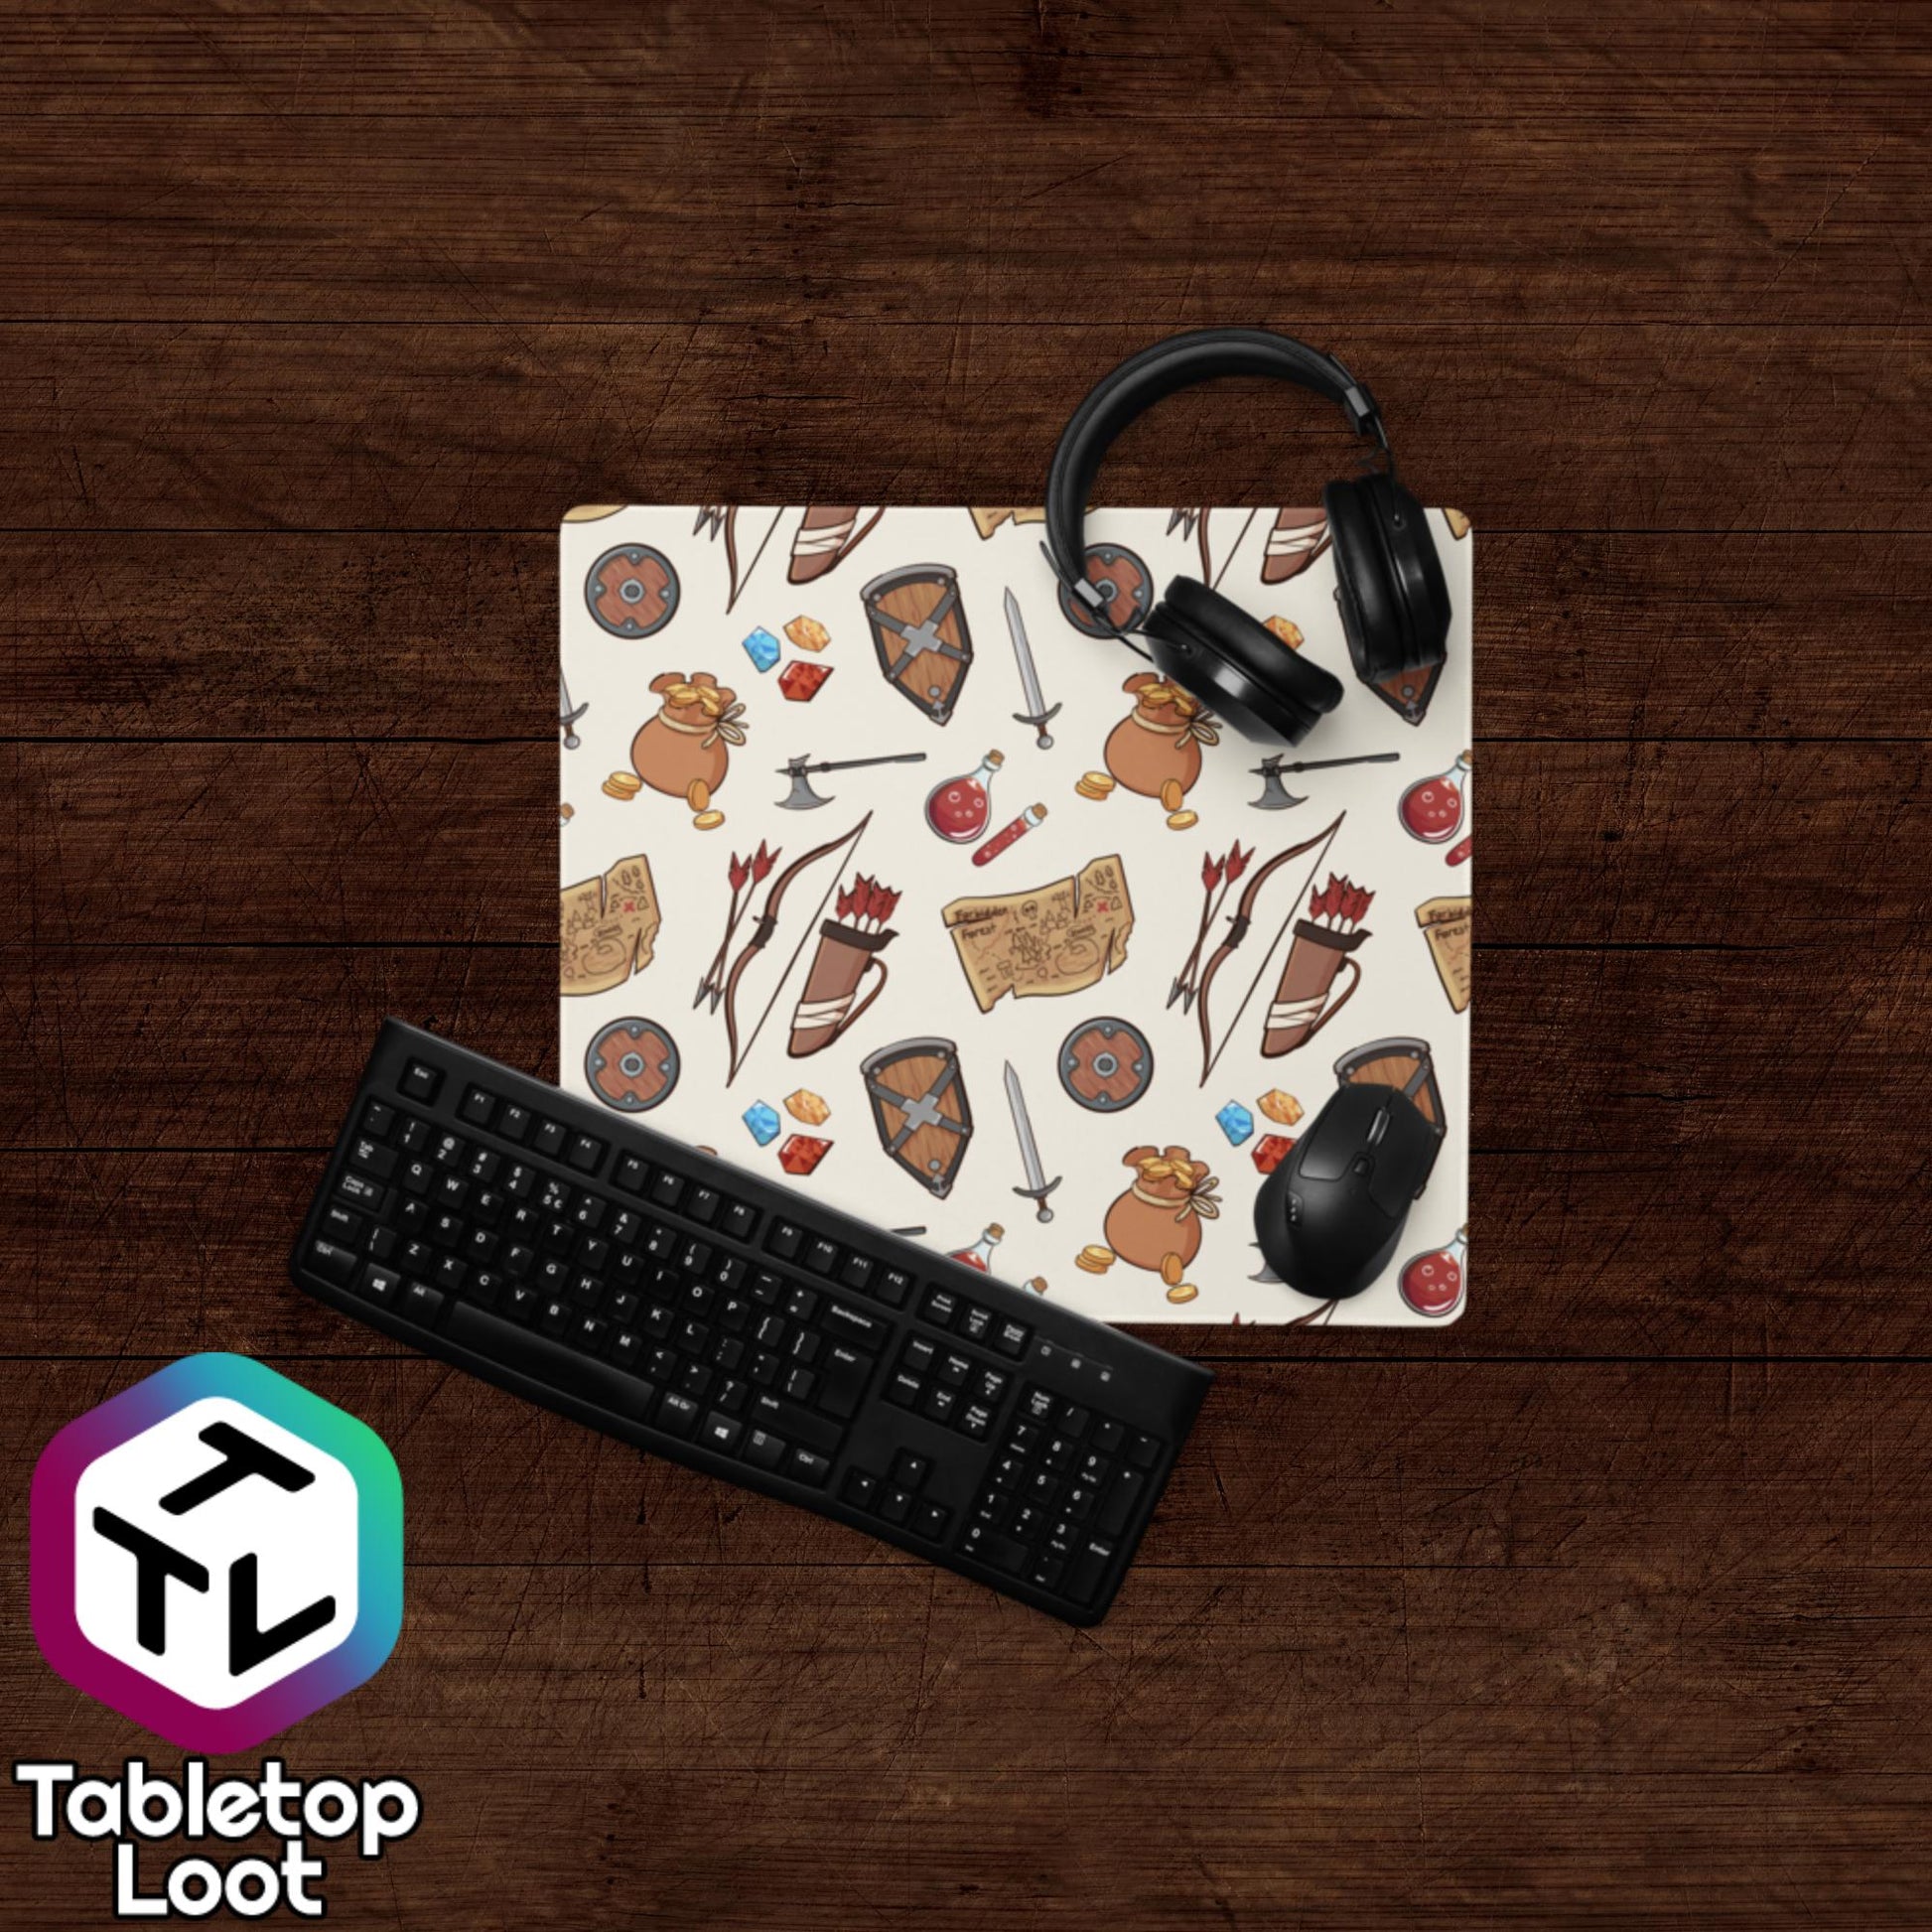 The Adventuring 18 inch by 16 inch size mouse pad from Tabletop Loot has a pattern of illustrated adventuring gear including gems, gold, shields, swords, bows, arrows, quivers, and maps.